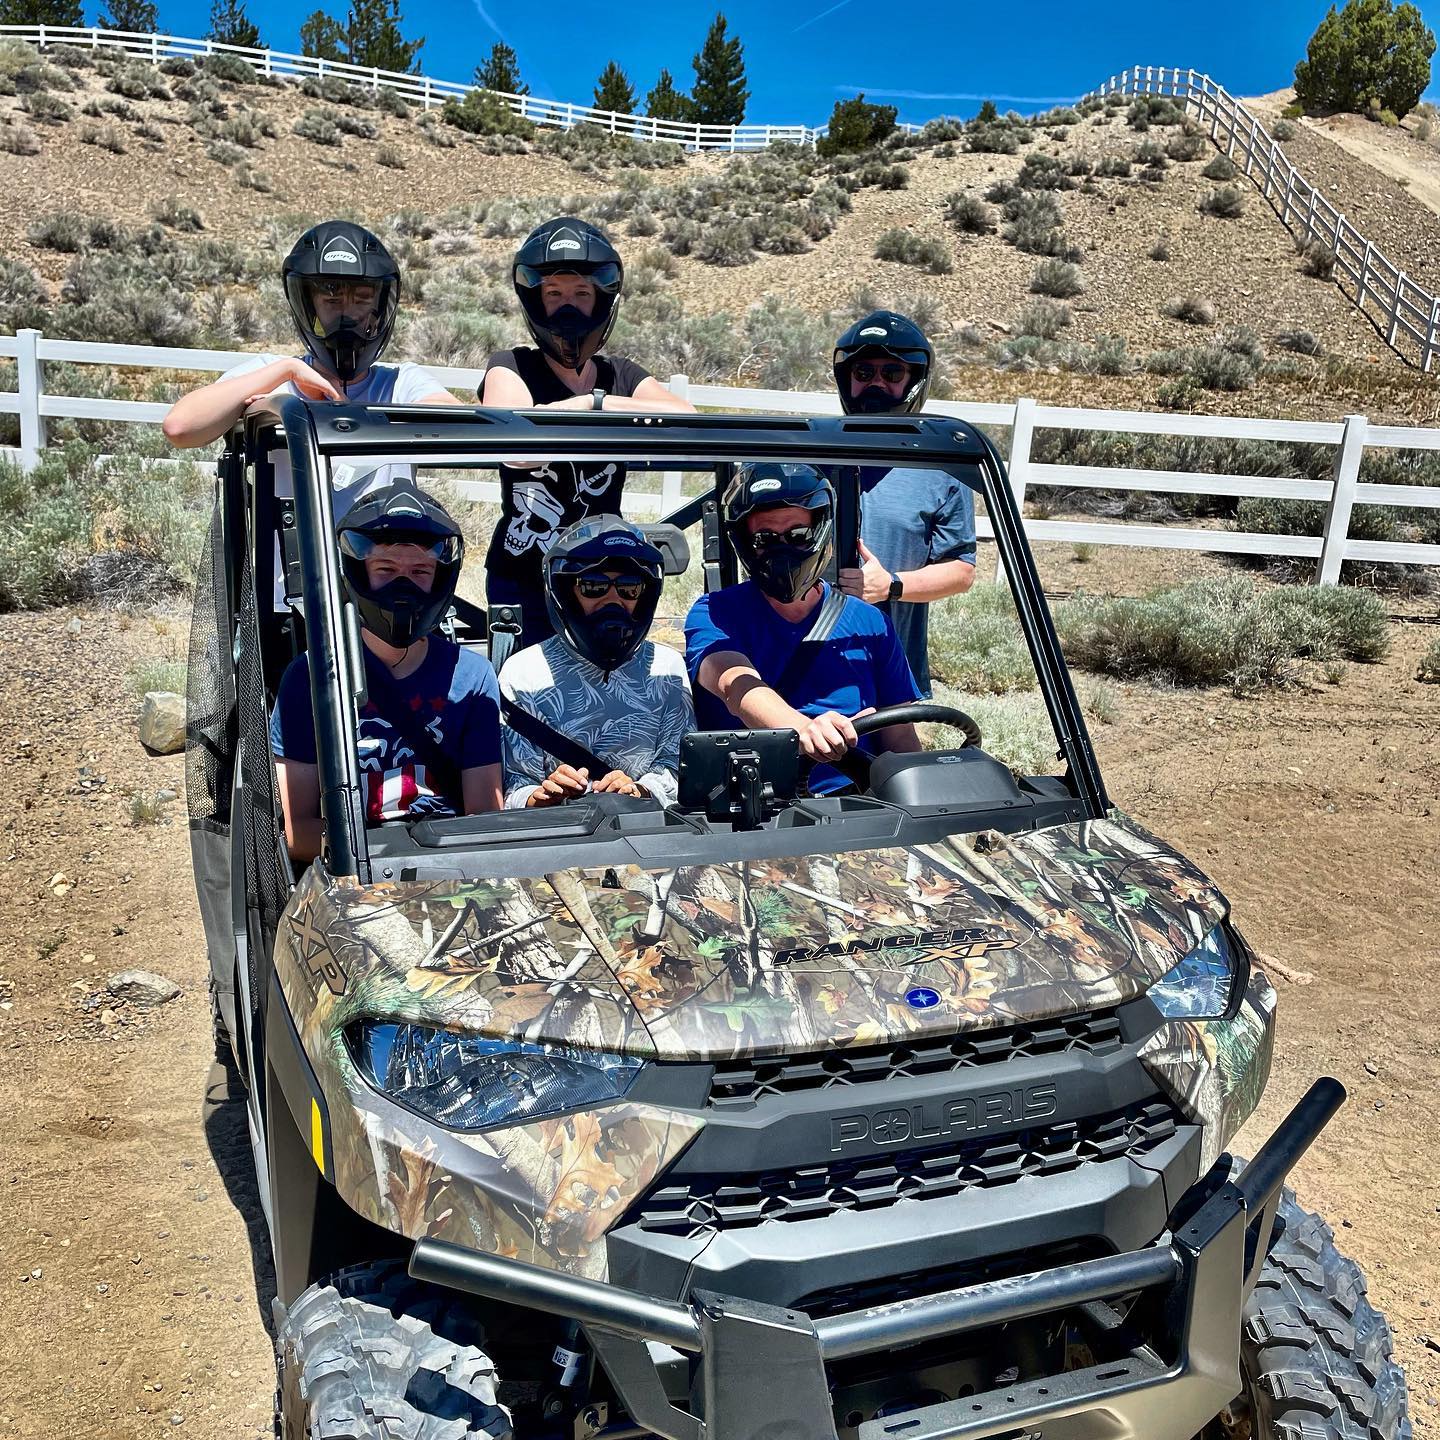 3 friends look off into the distant mountains with 2 UTV Polaris RZRs